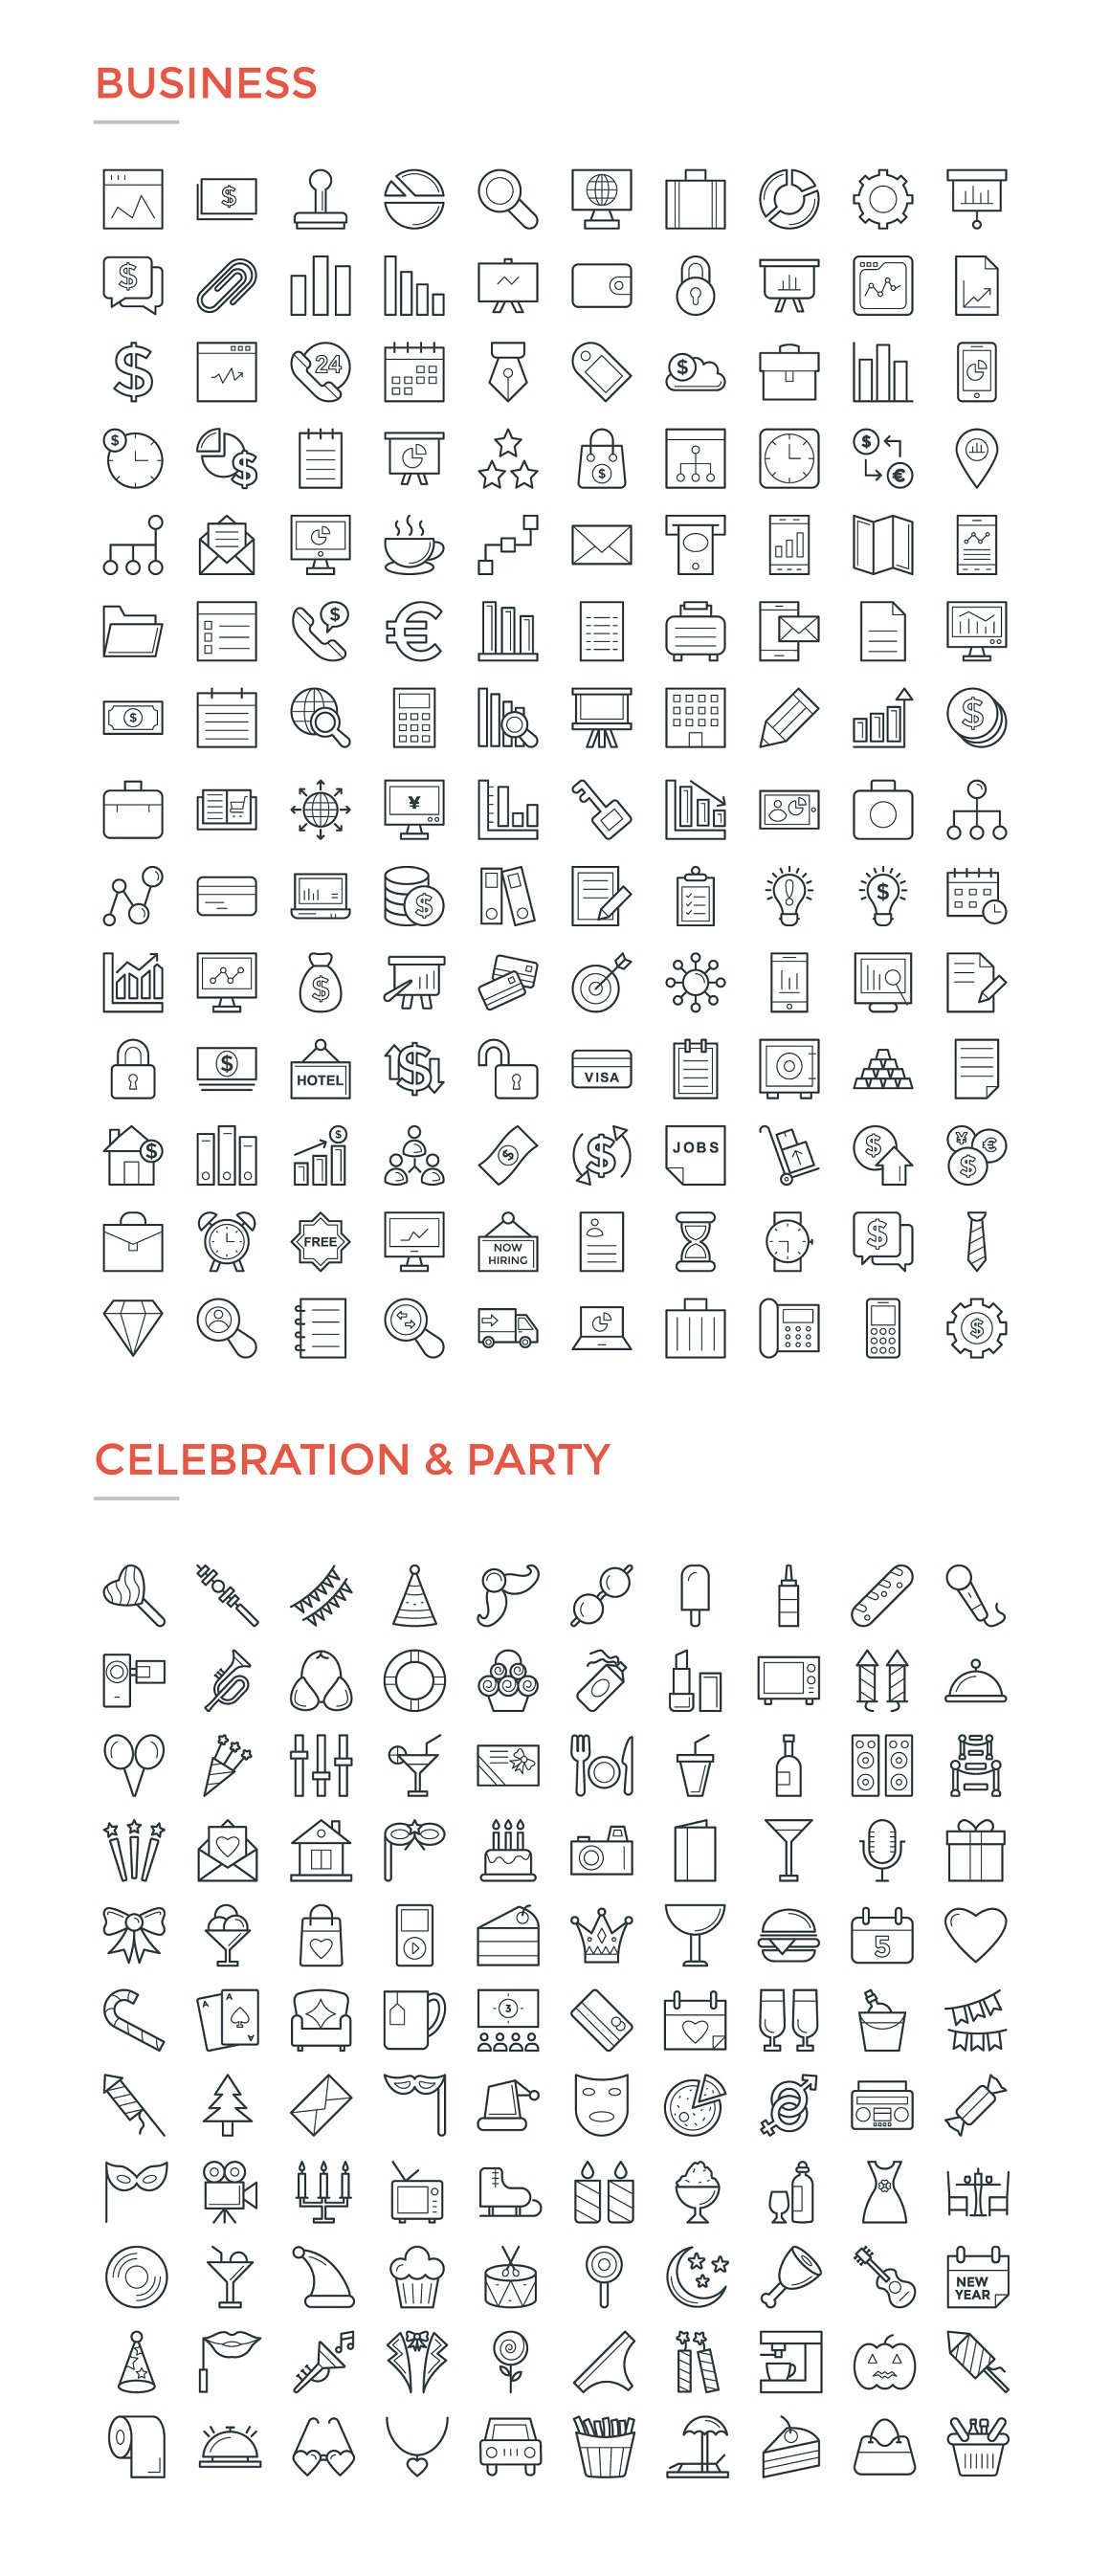 Pack of business and celebration & party icons on a white background.